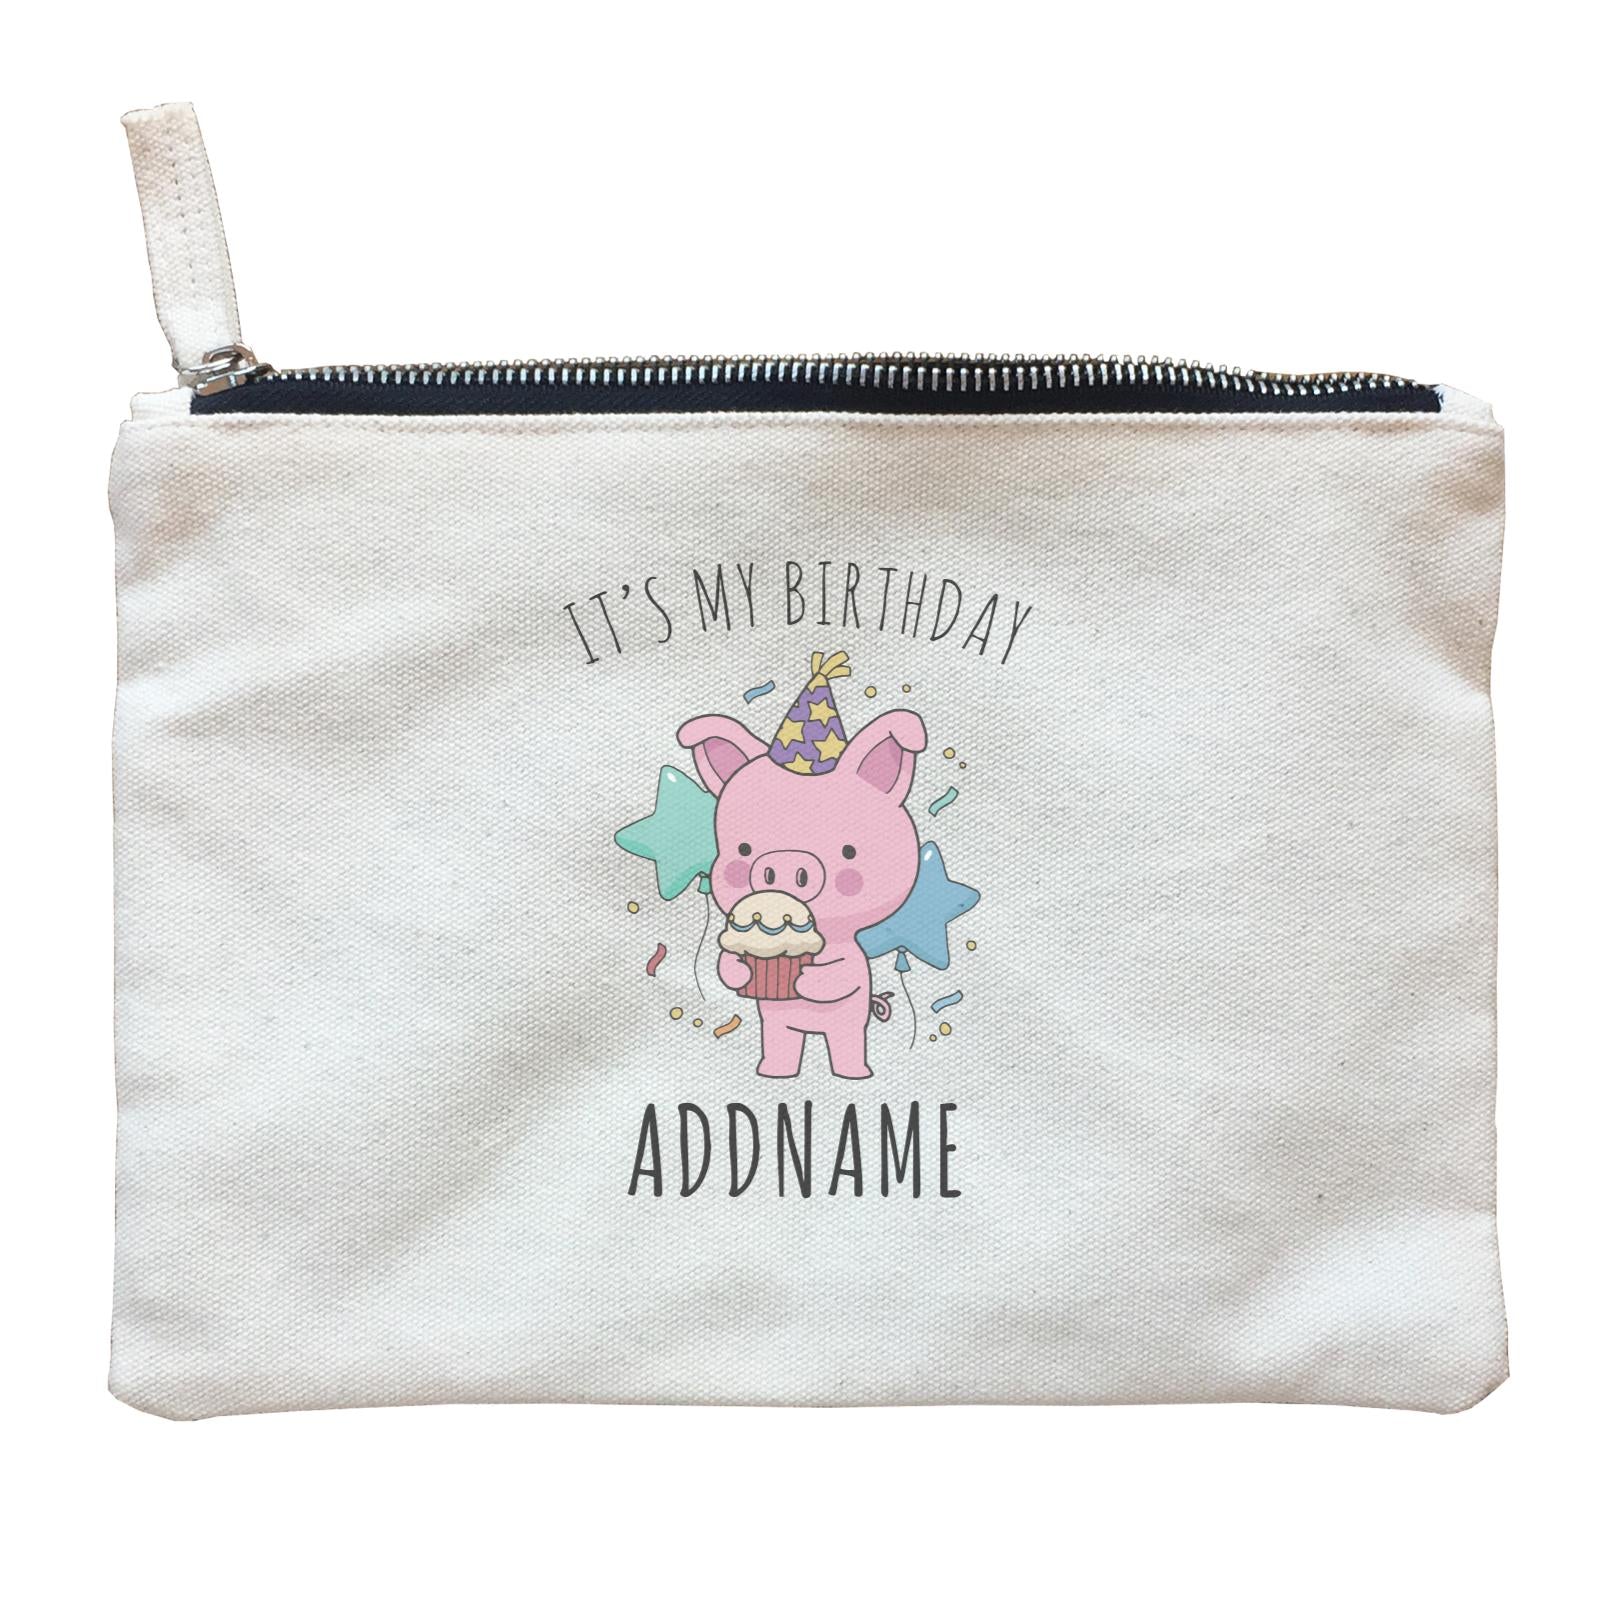 Birthday Sketch Animals Pig with Party Hat Eating Cupcake It's My Birthday Addname Zipper Pouch